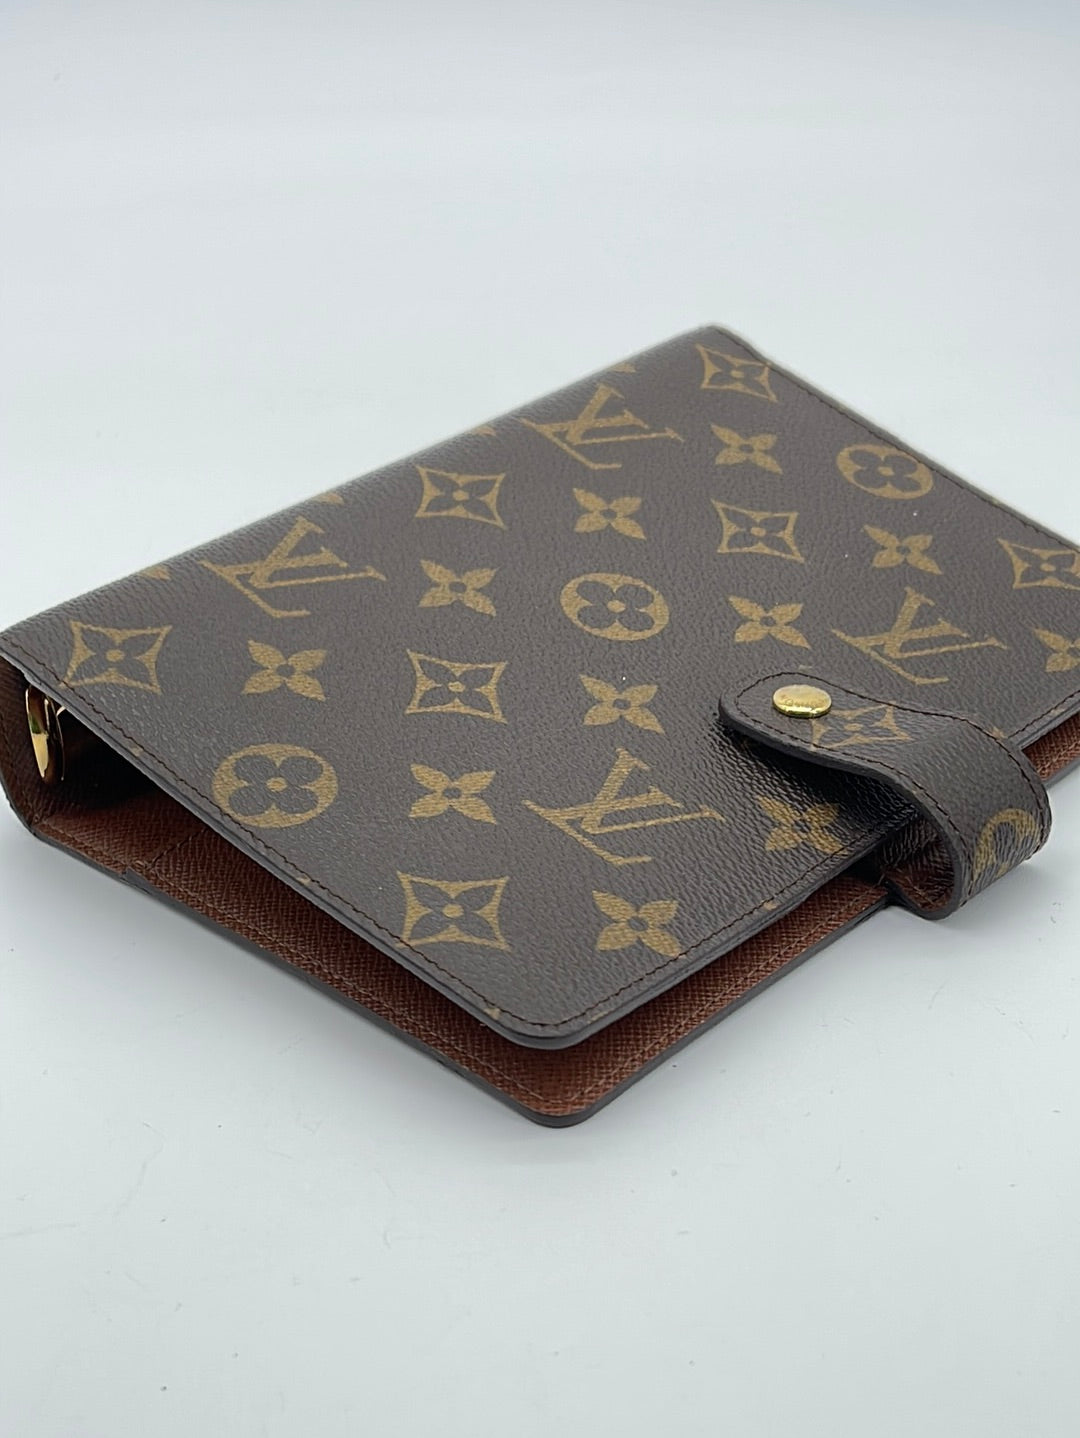 Shop Louis Vuitton Stationary by えぷた